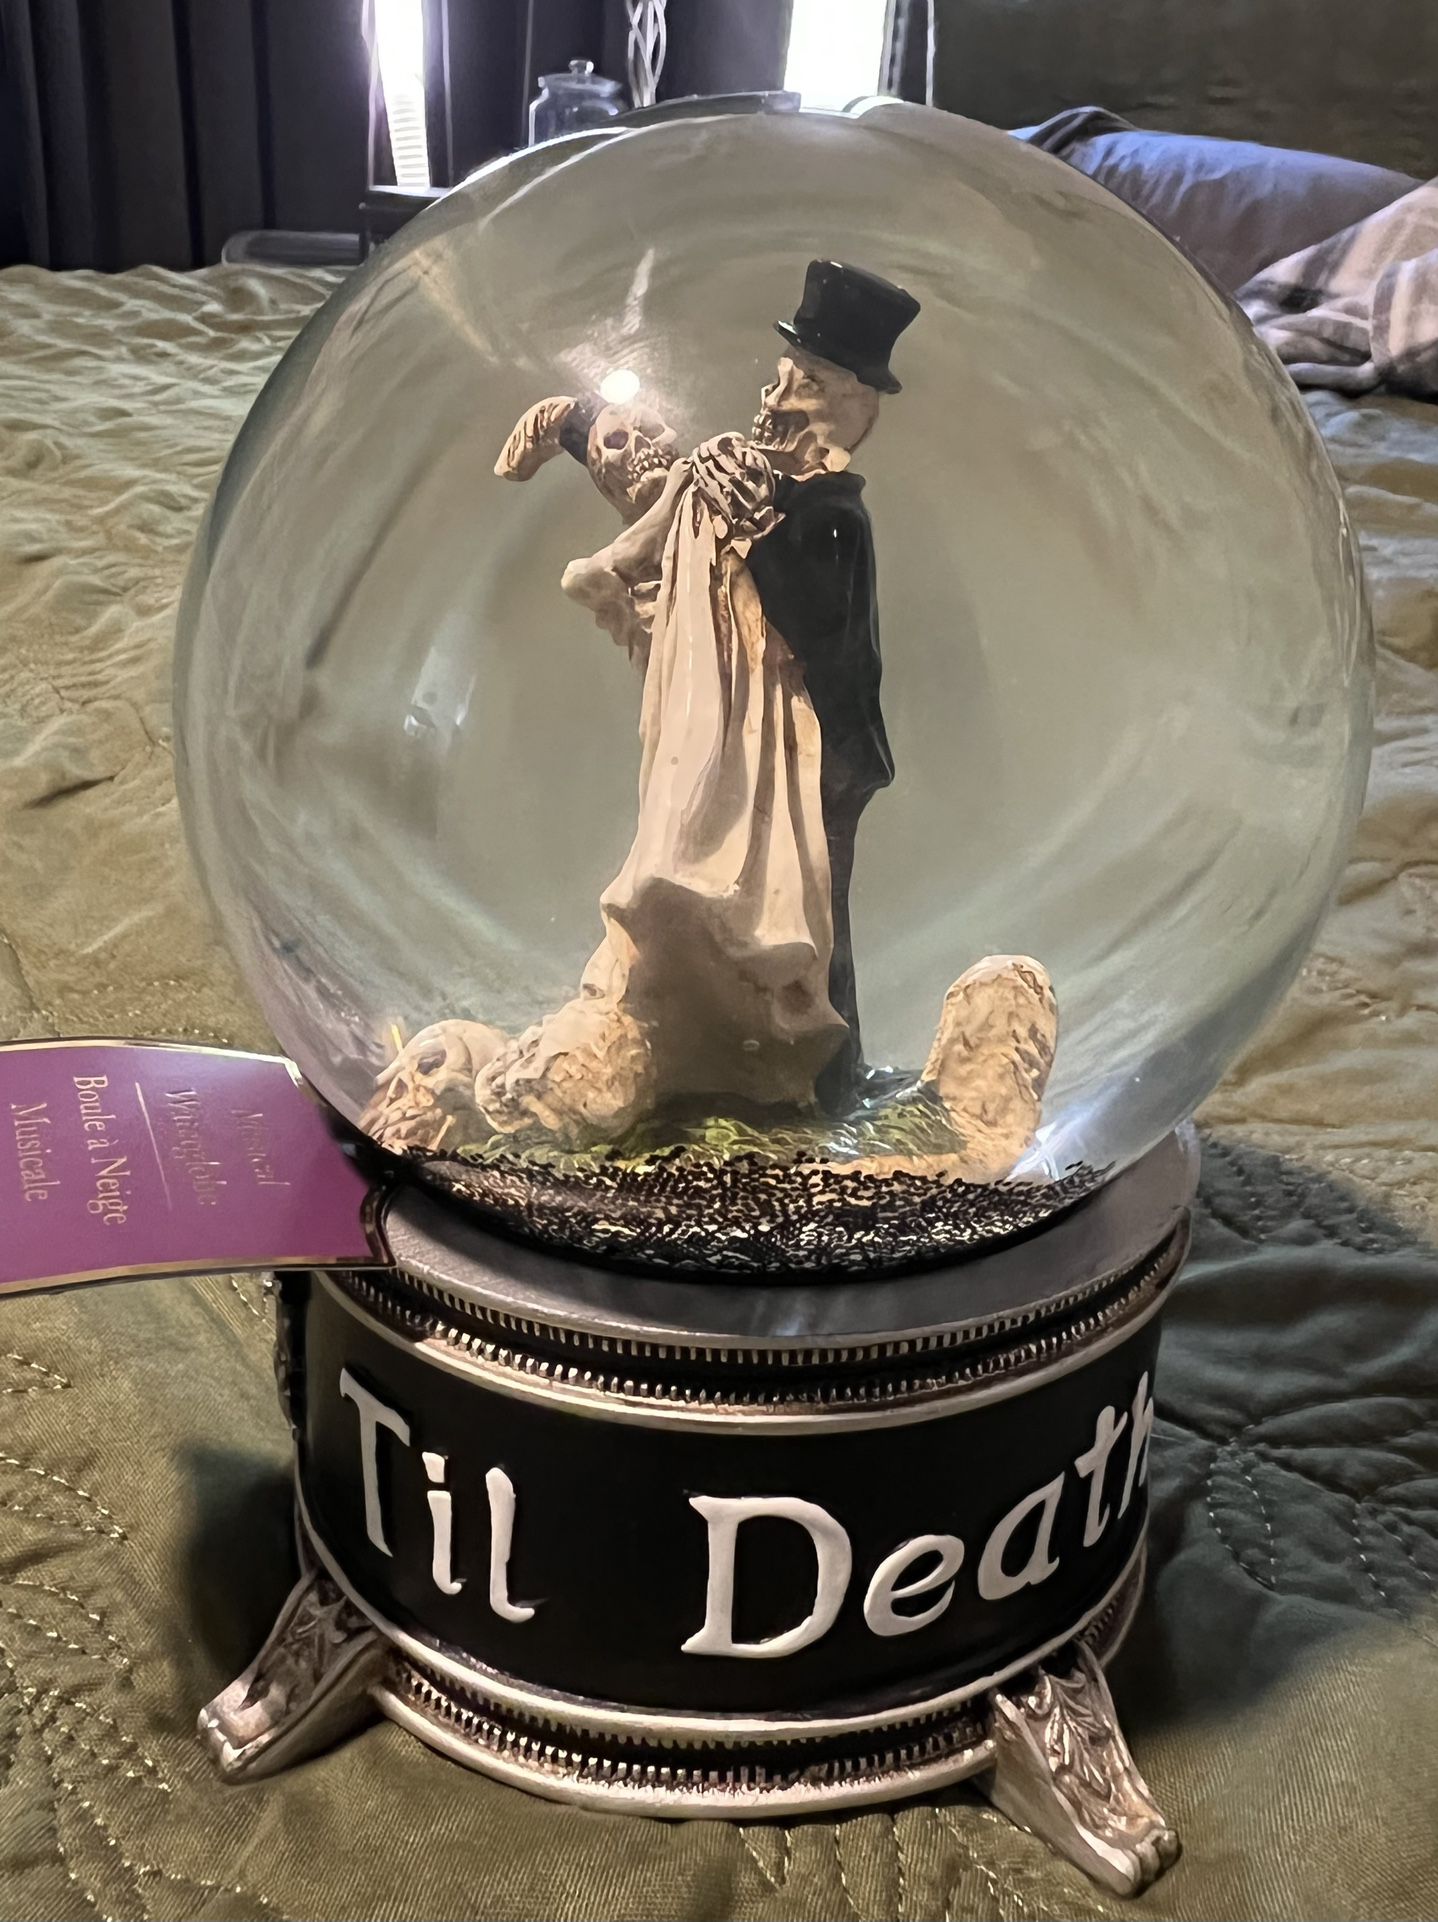 Moonlight Manor musical skeleton bride and groom Snow Globe - One little piece missing